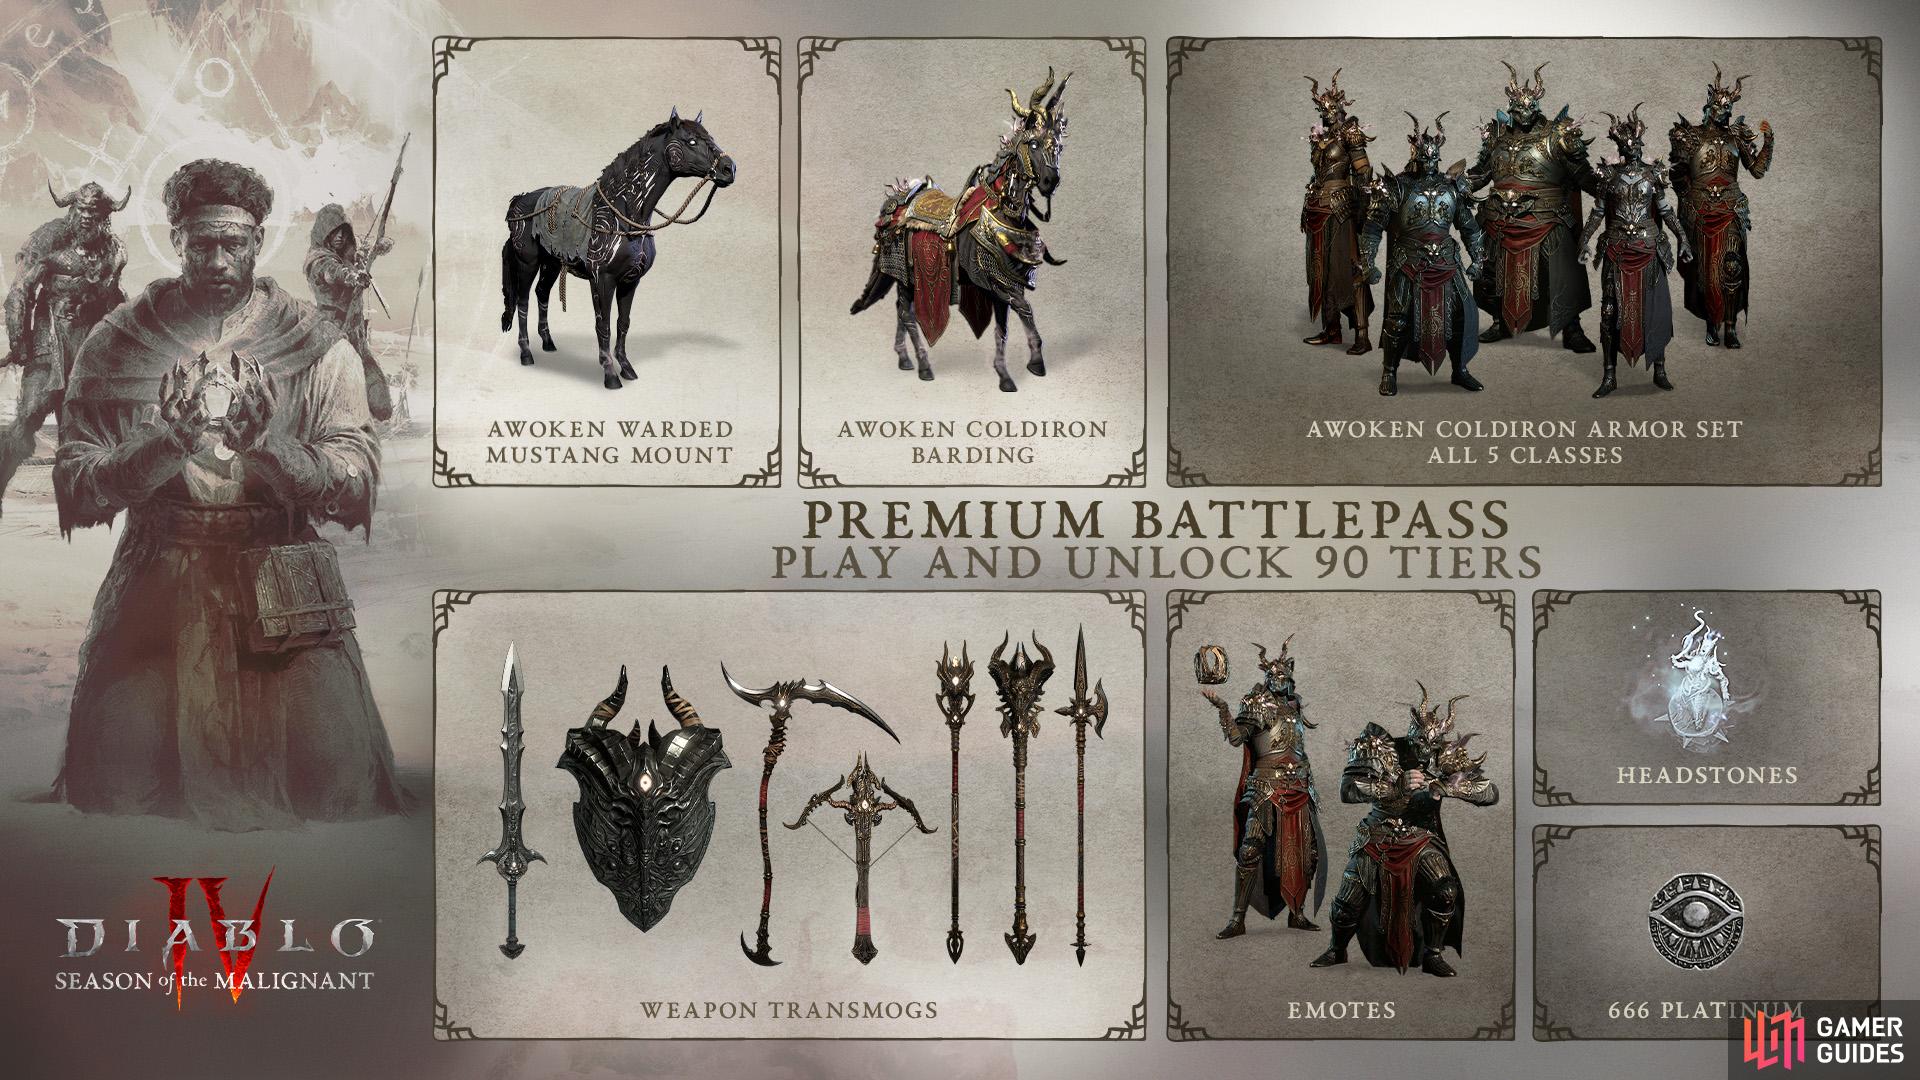 Here are the rewards you can expect from the Diablo 4 Season 1 Battle Pass and the Items you can unlock. Image via Blizzard Entertainment.